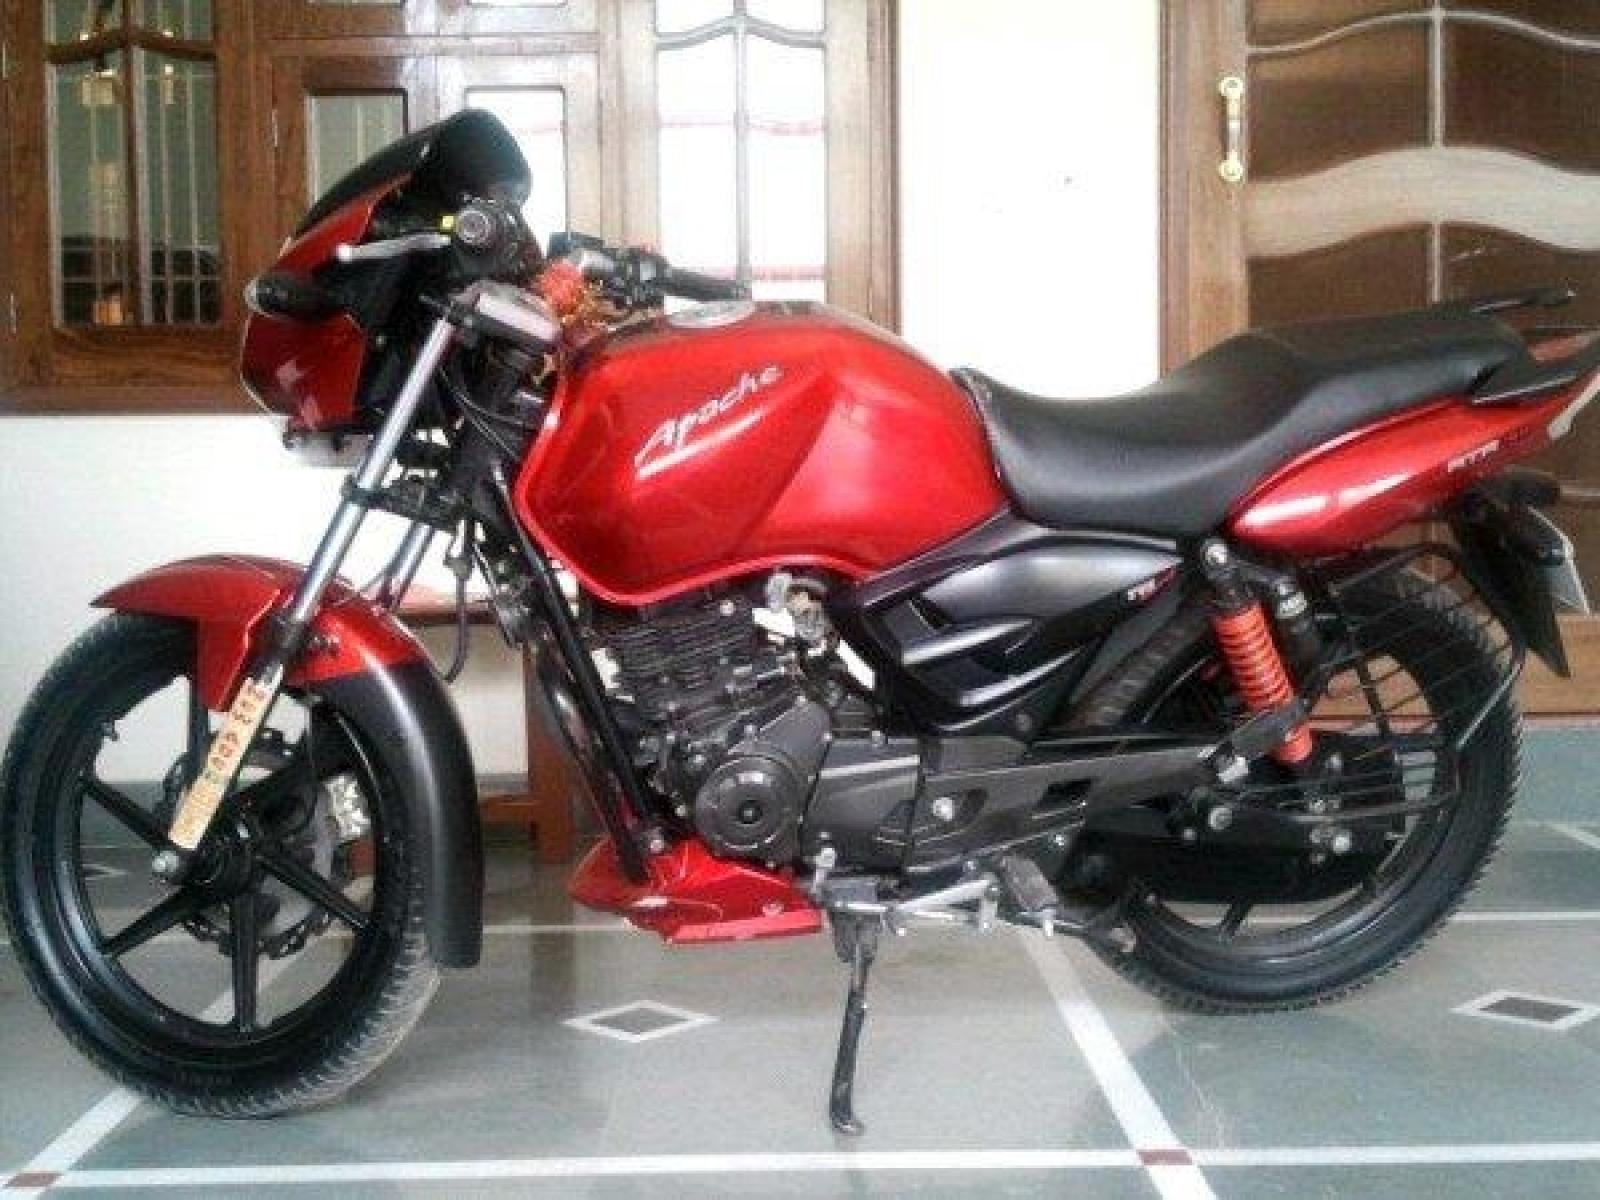 2008 Tvs Apache Rtr 160 Specs Images And Pricing